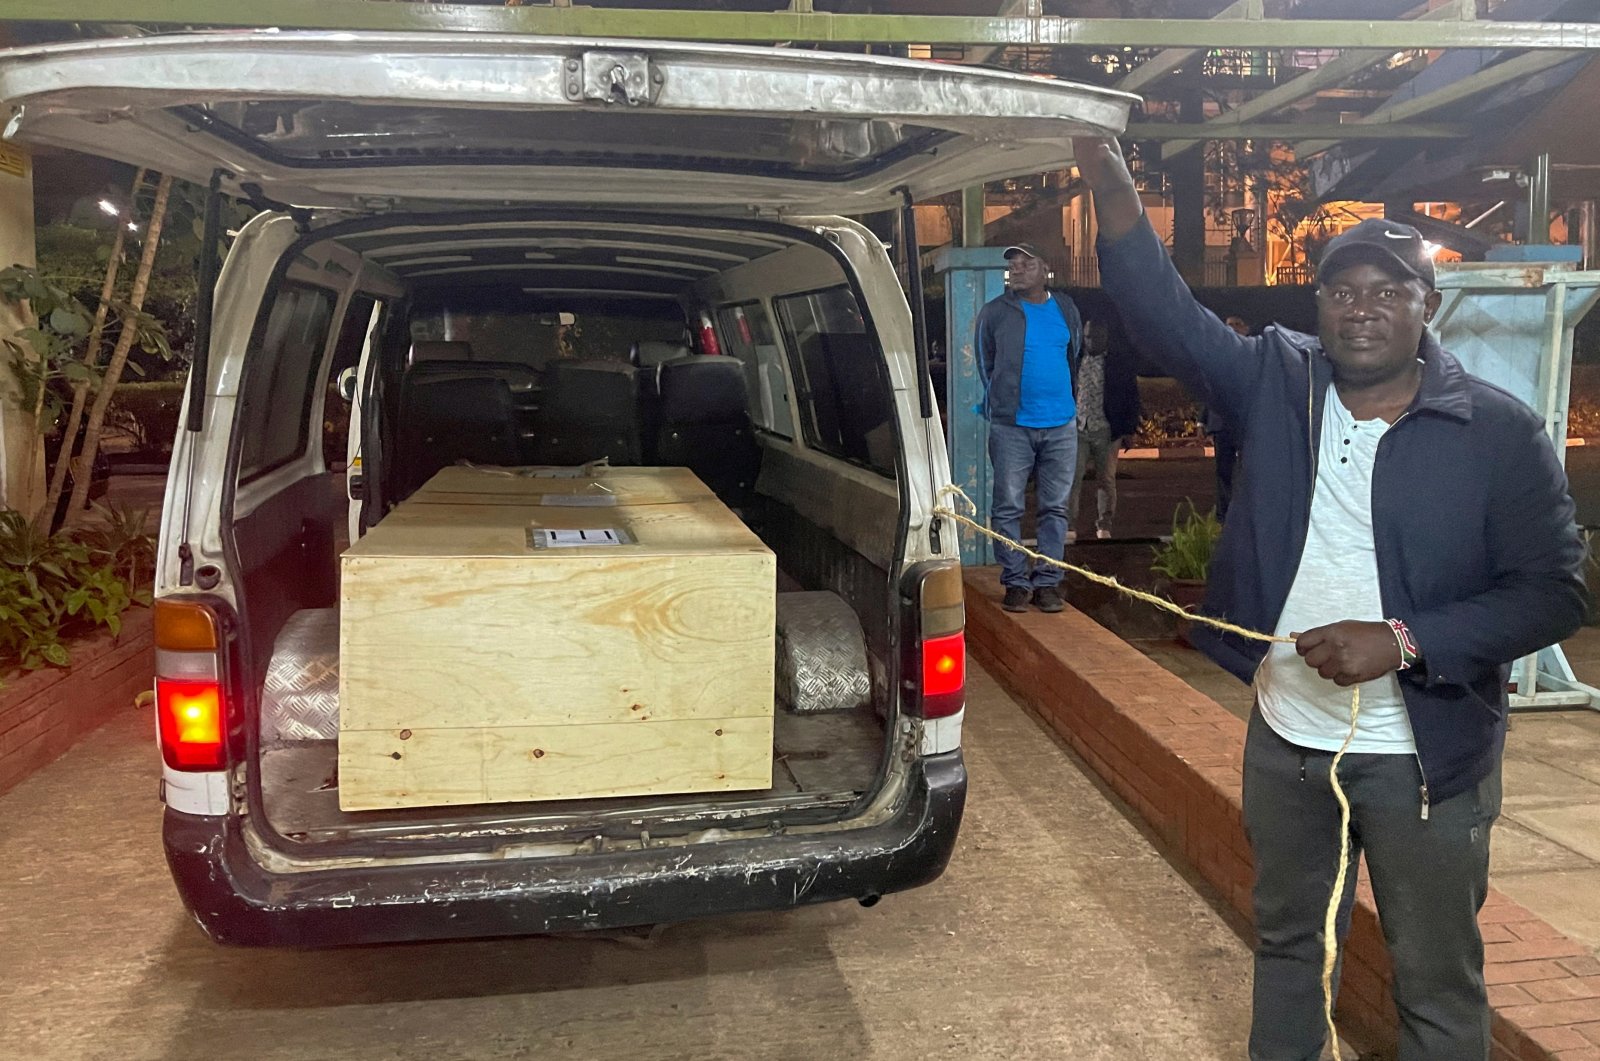 The wooden coffin containing the body of Pakistani journalist Arshad Sharif, who was shot dead when police hunting car thieves opened fire on the vehicle he was traveling in as it drove through their roadblock without stopping, is loaded into a courtesy van at the Chiromo mortuary in Nairobi, Kenya, Oct. 24, 2022. (Reuters File Photo)